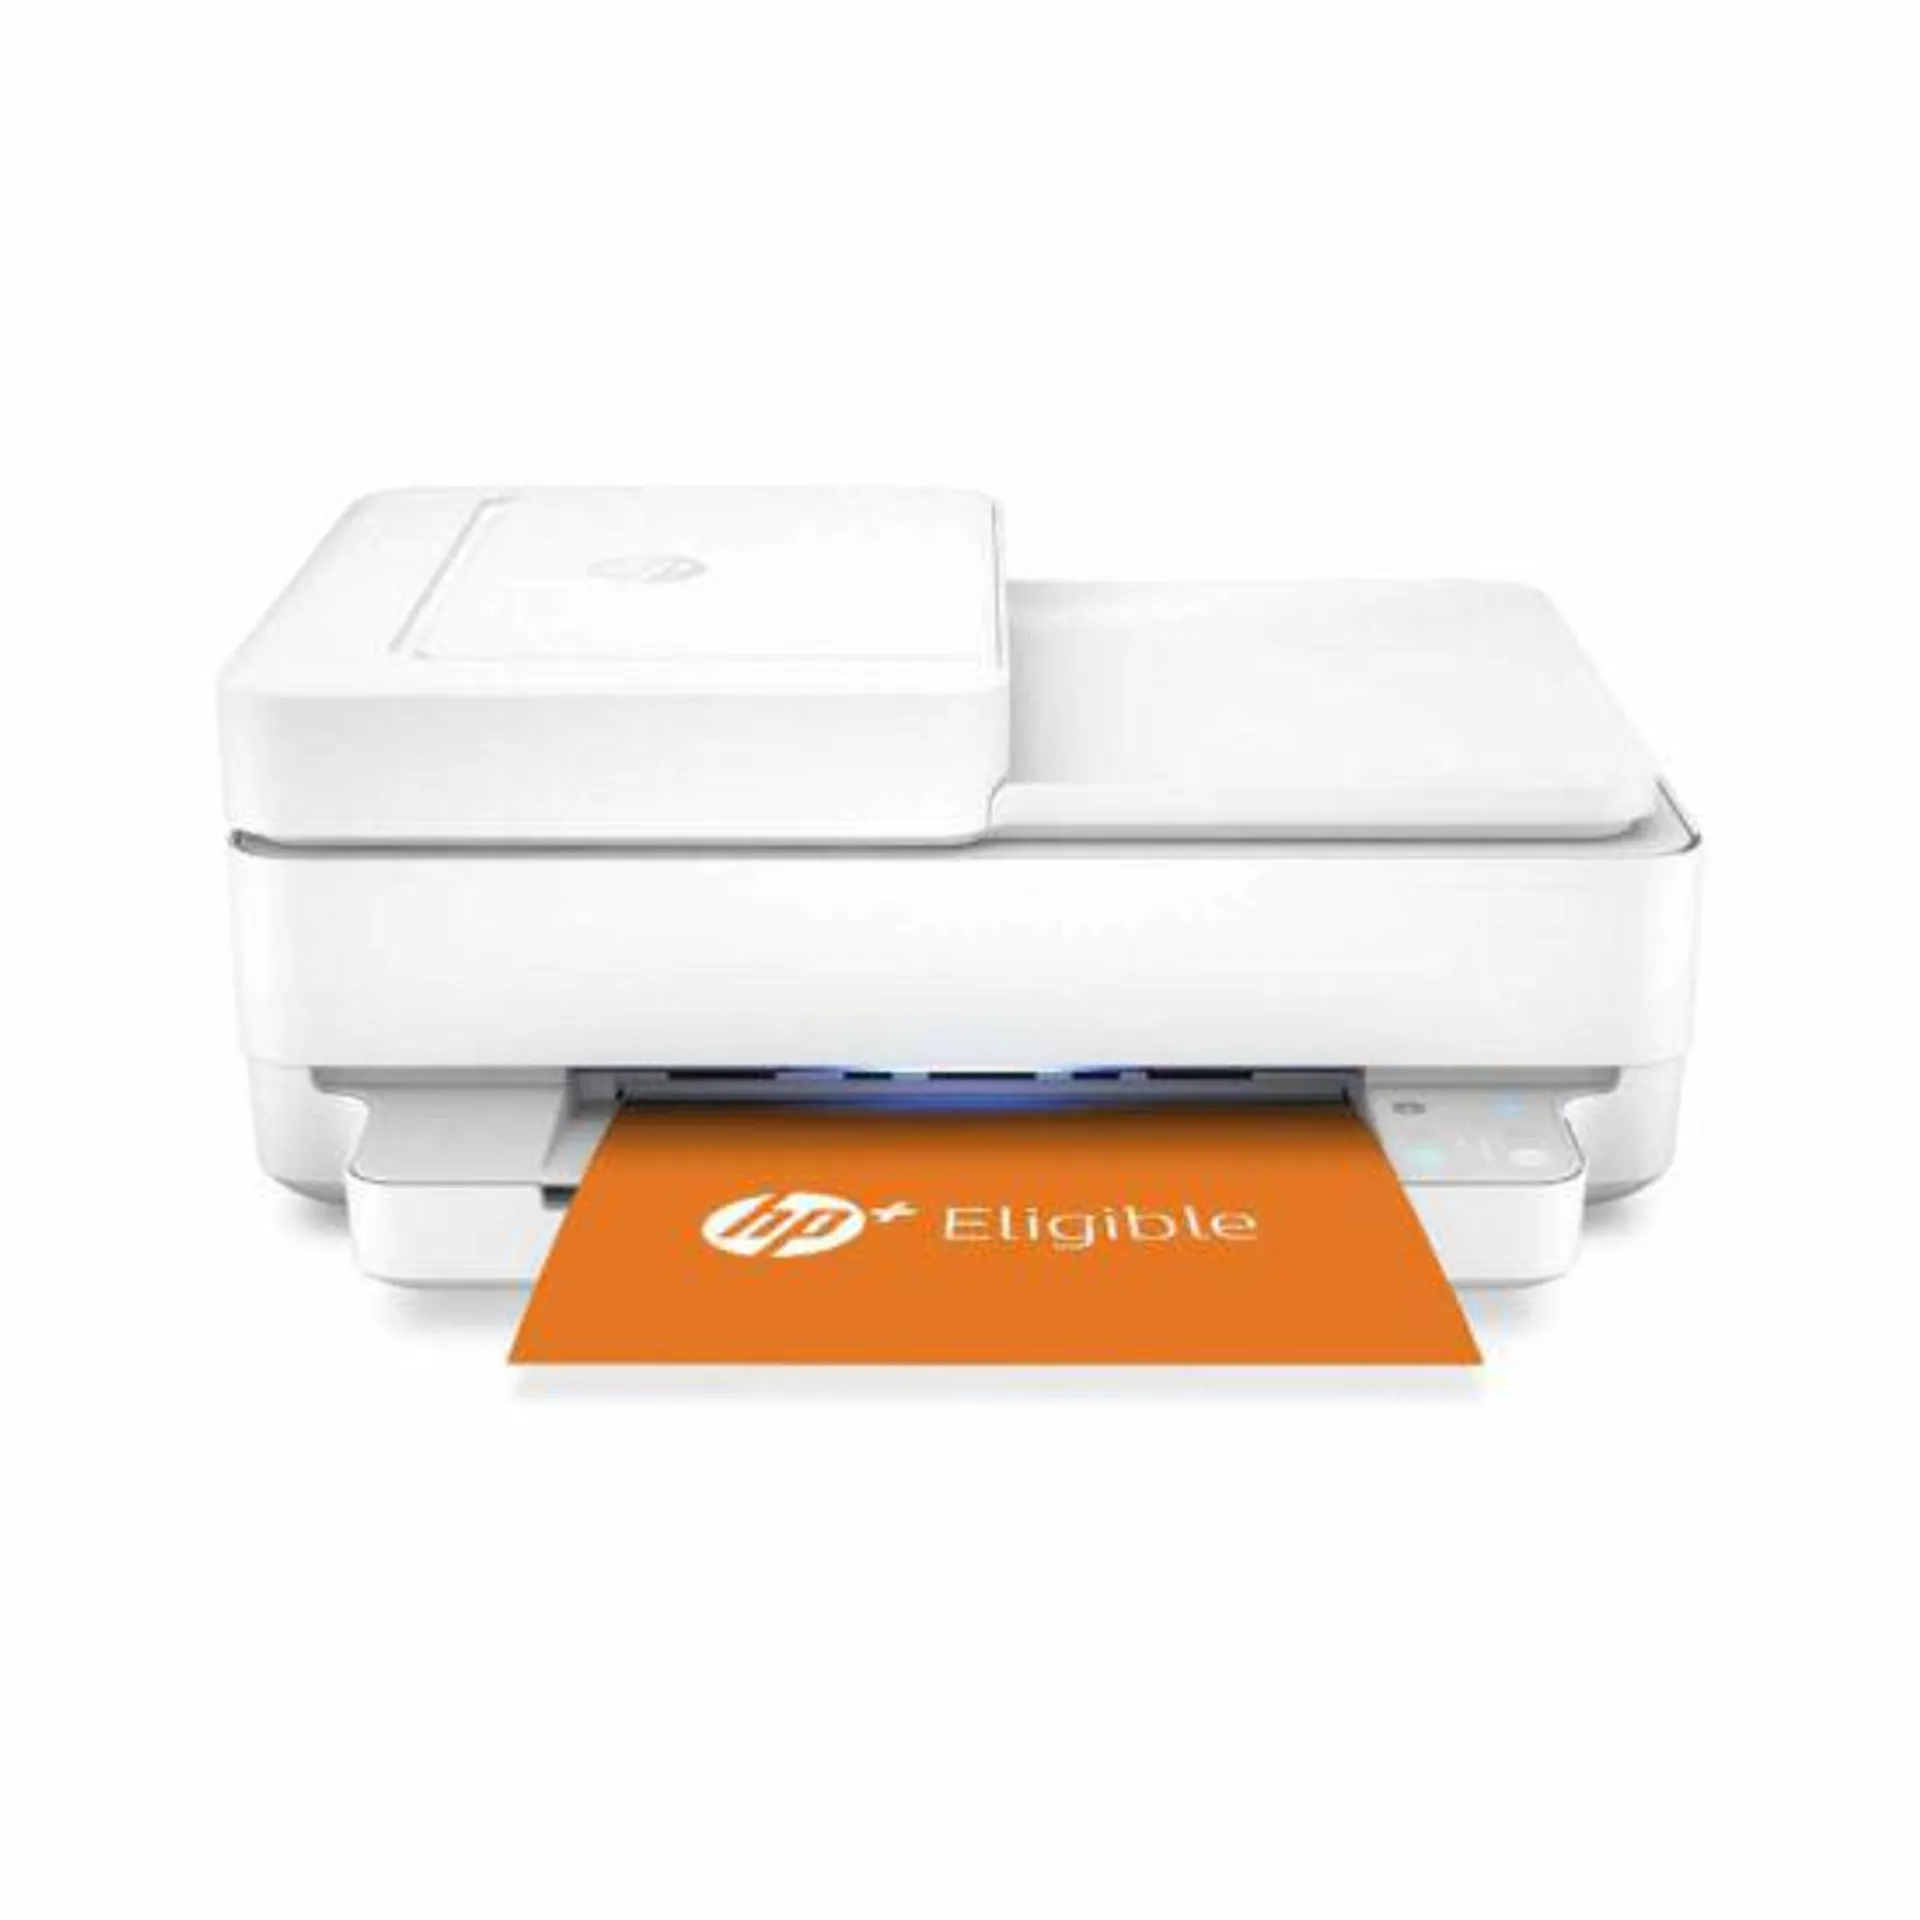 HP Envy 6430e All In One Wireless Inkjet Printer with HP Plus and 3 Months Instant Ink